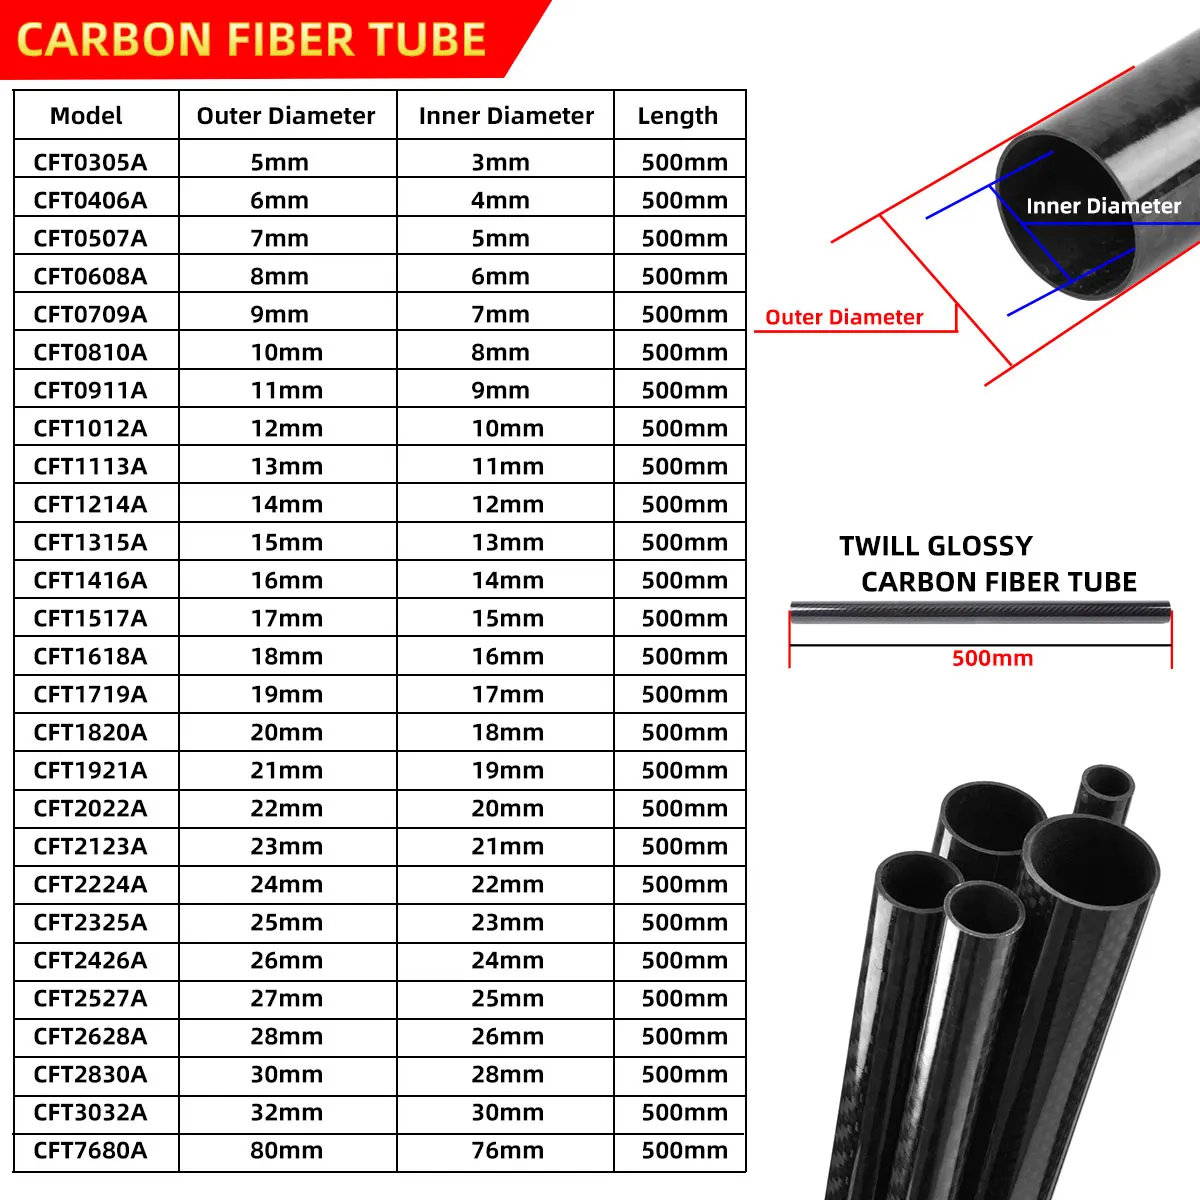 2PCS Carbon Fiber Tube 3K Twill Glossy Length 500mm Diameter 5mm to 32mm Full Carbon Pipe for RC Model Airplane Car or DIY Usage